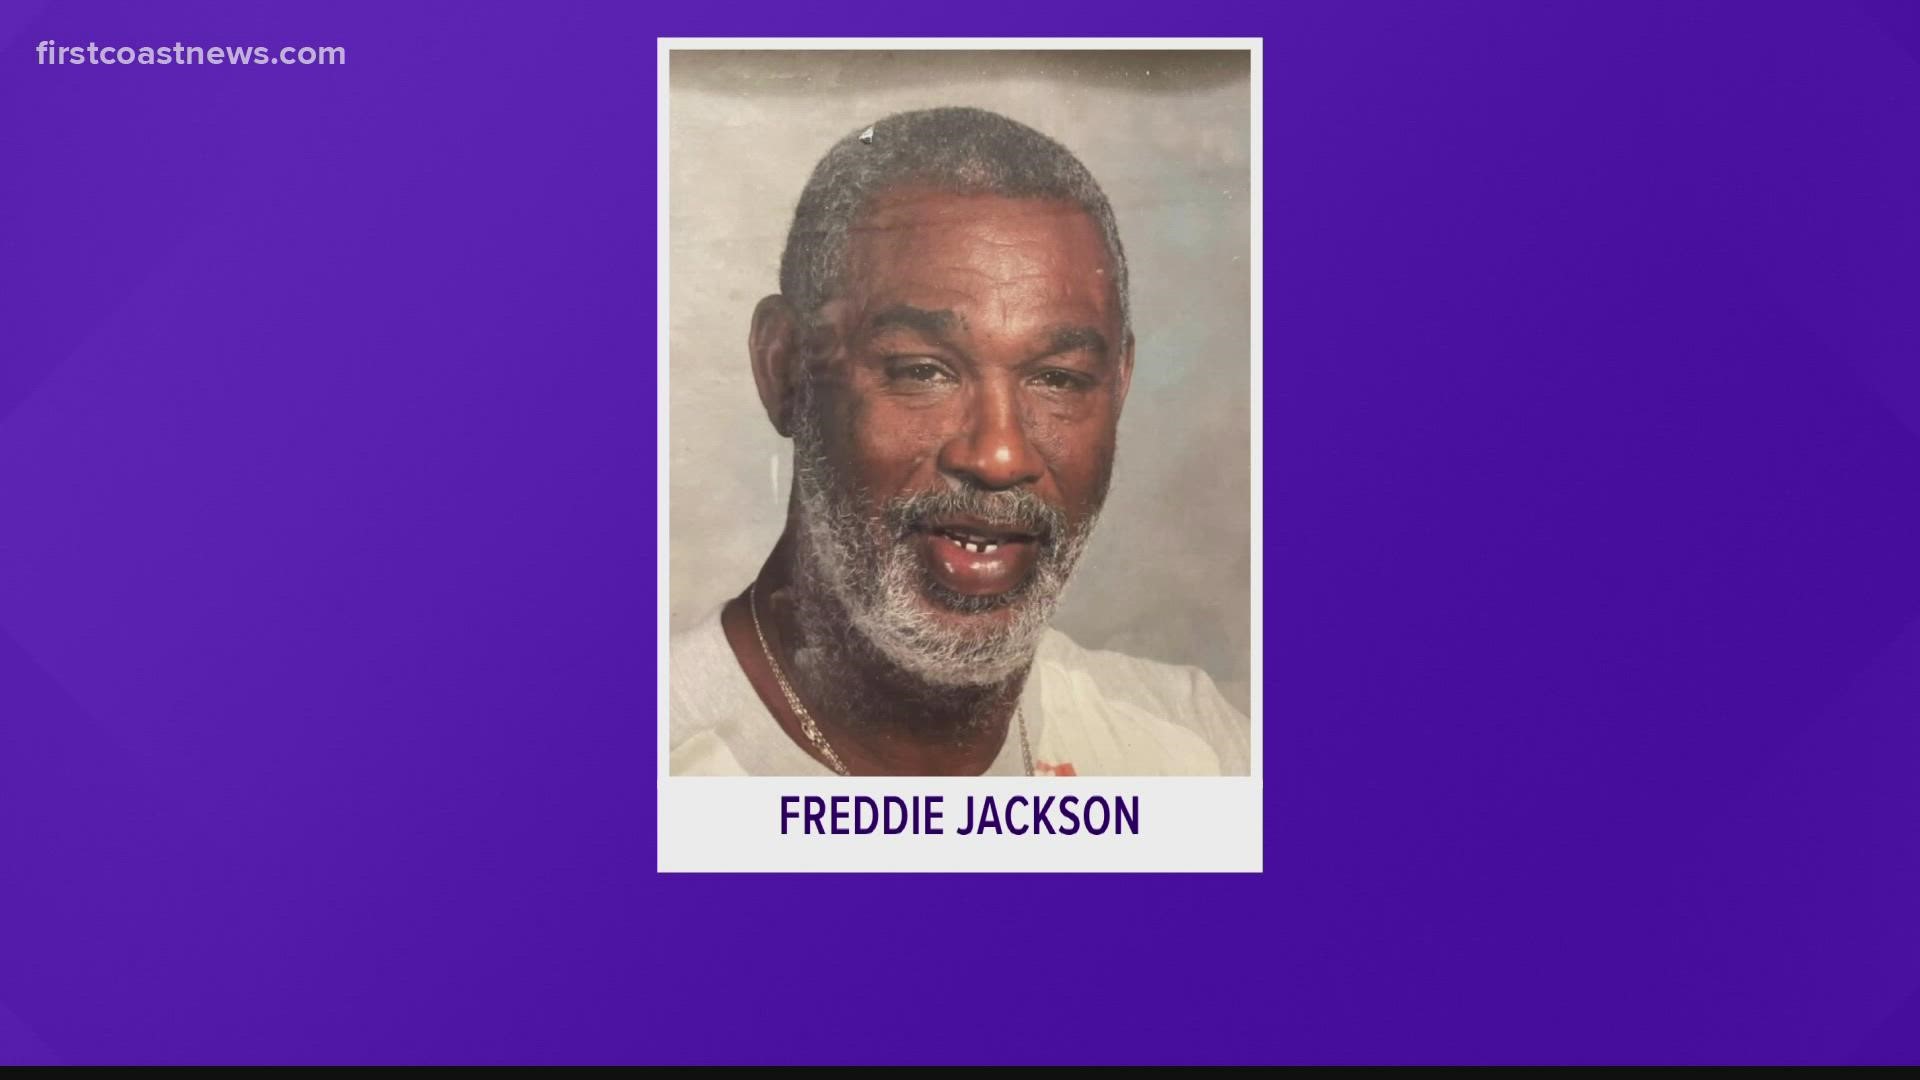 Freddie Jackson has been identified as the man shot to death on West 14th Street in Jacksonville.